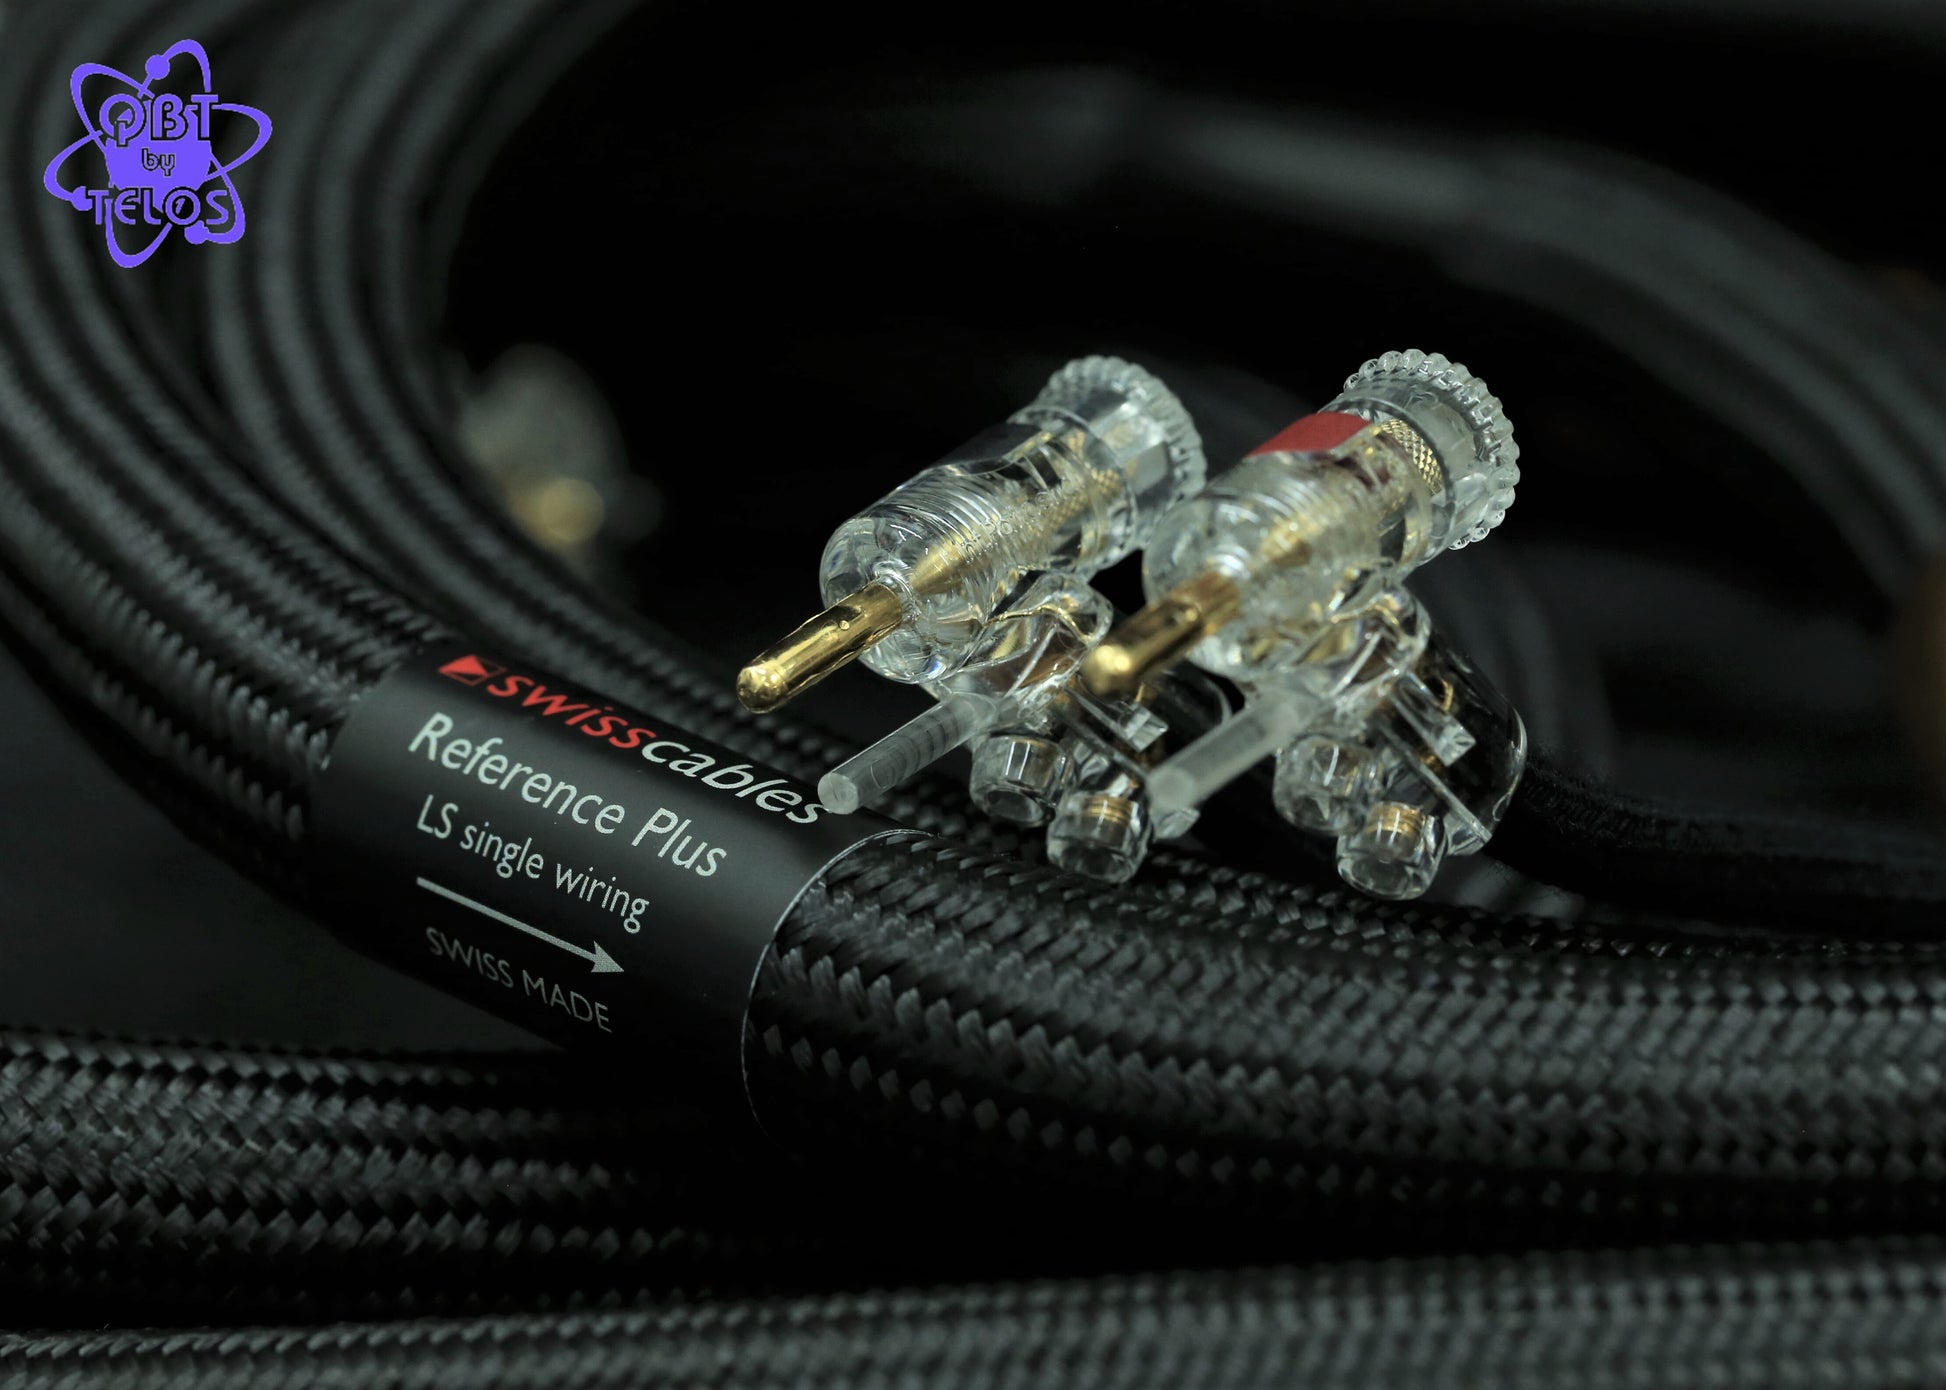 Swisscables Reference PLUS Speaker Cables